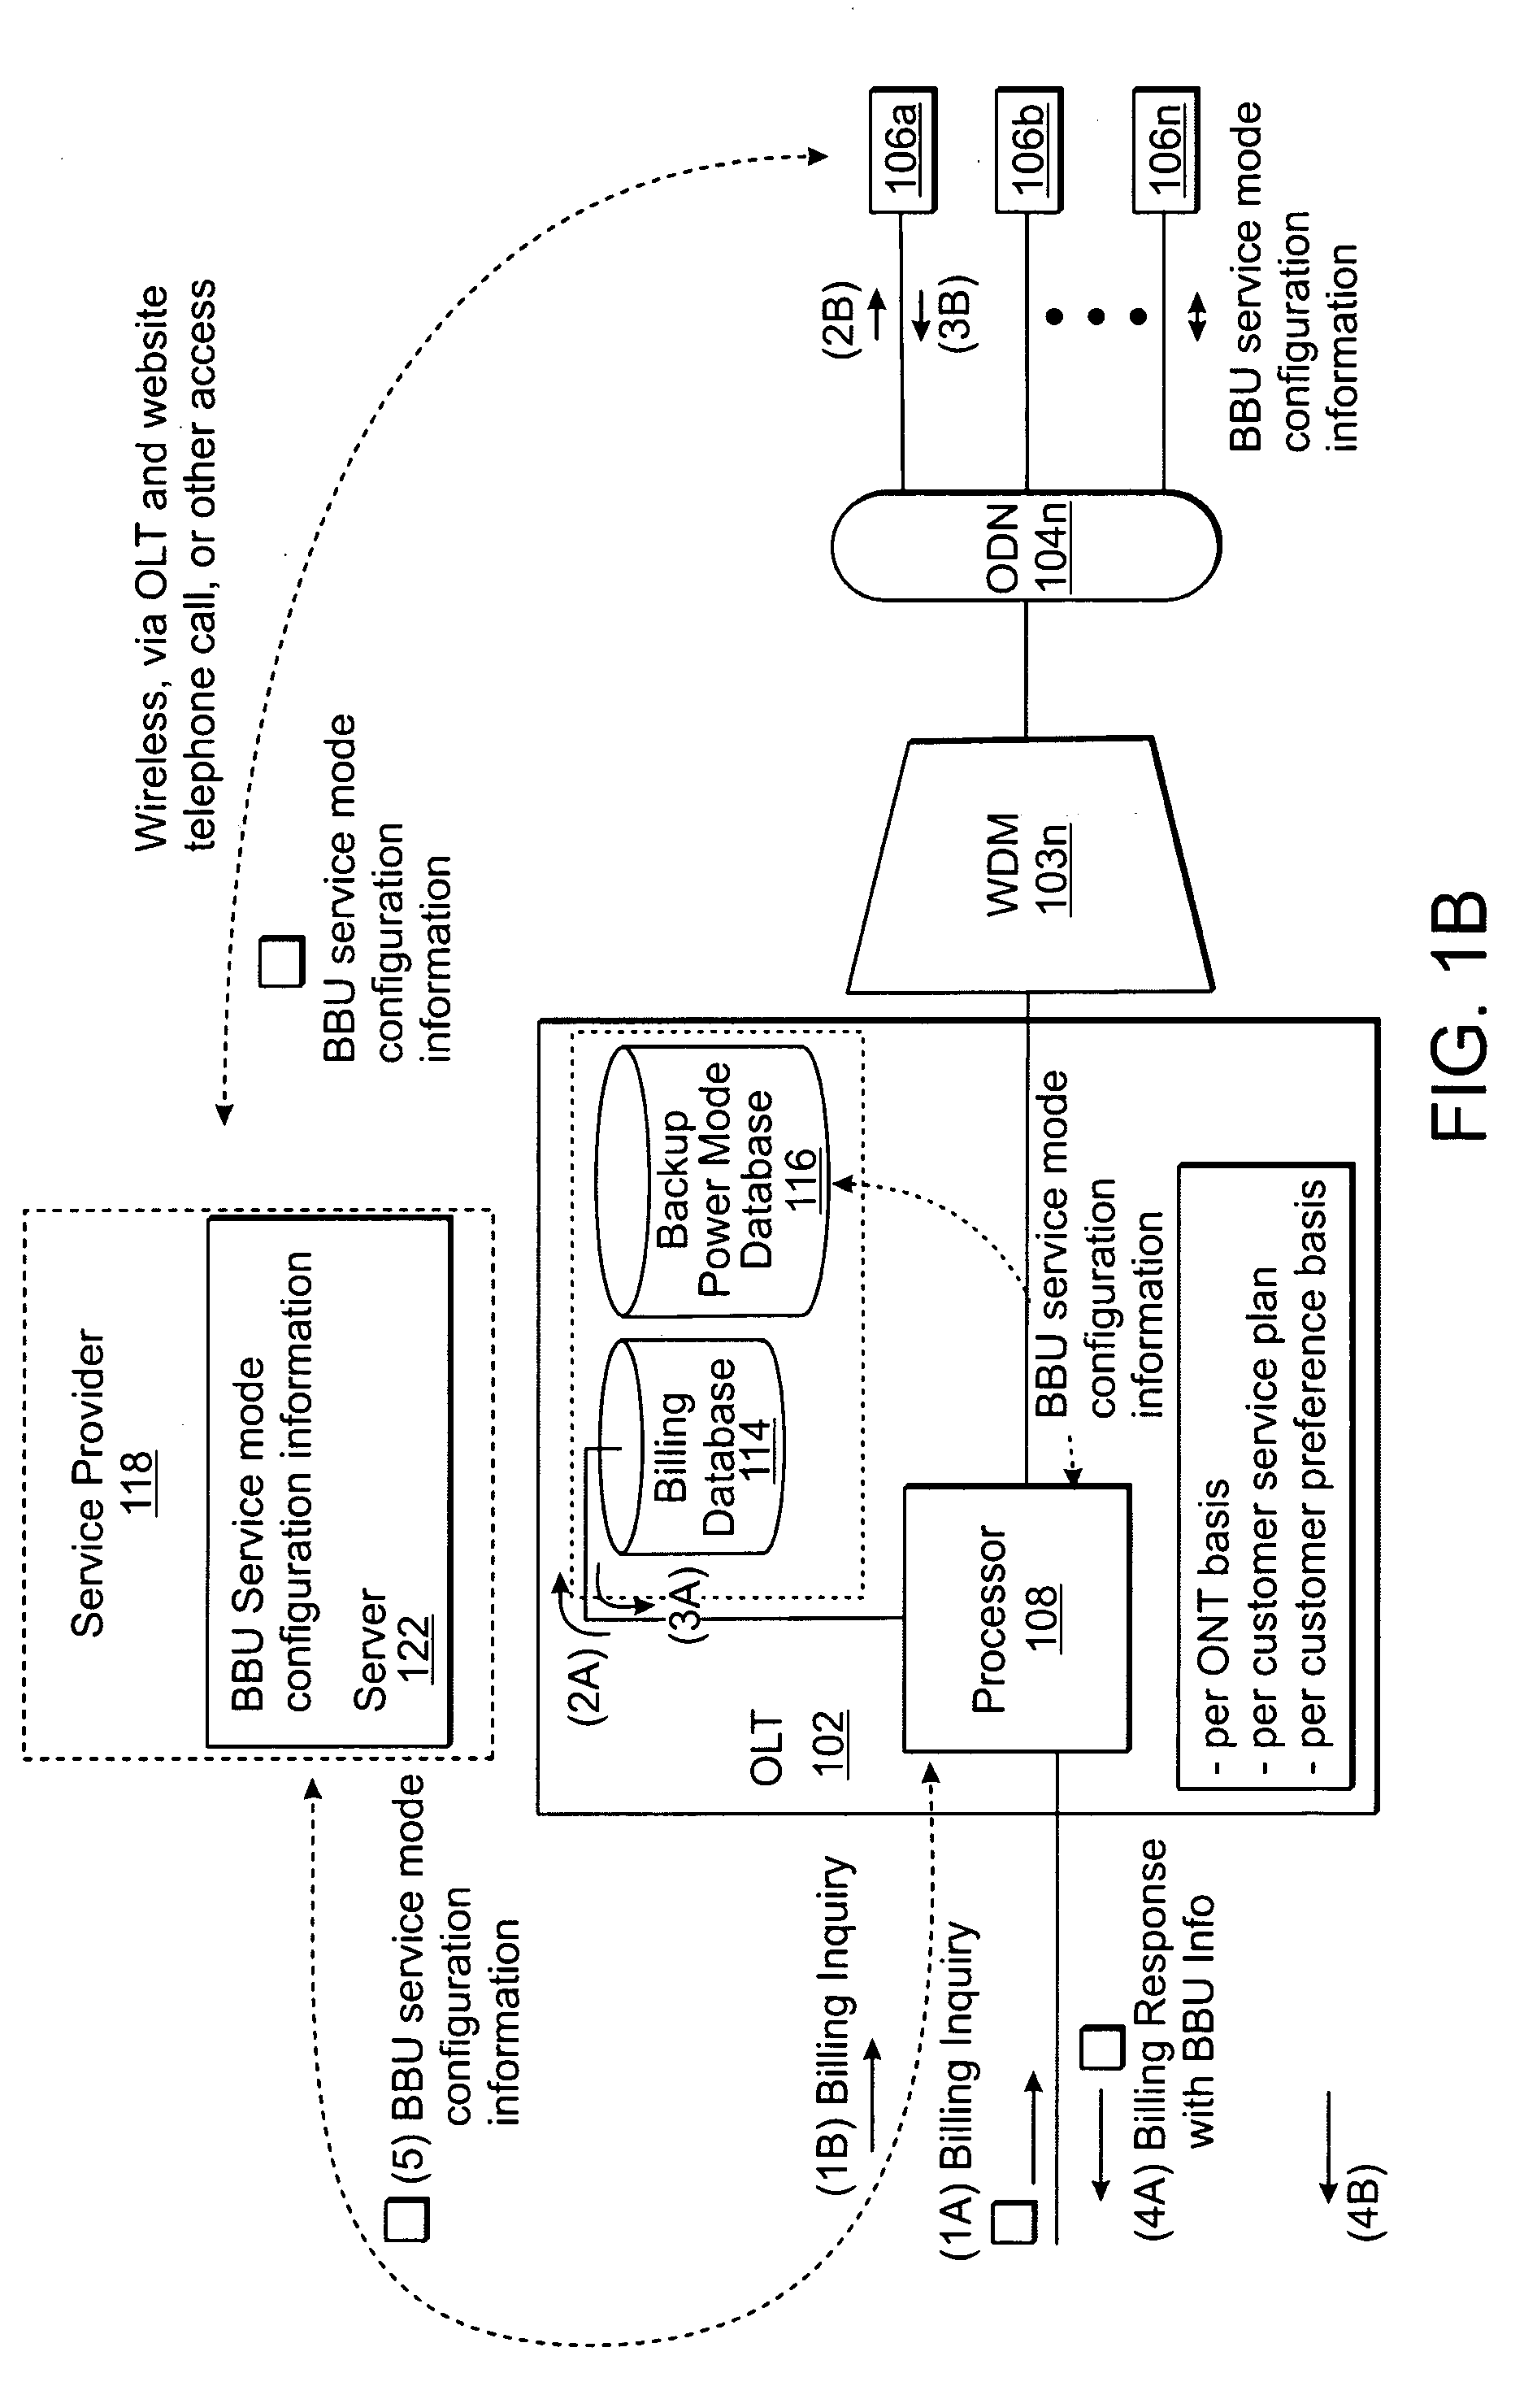 Method and apparatus for providing on-demand backup power for an optical network terminal